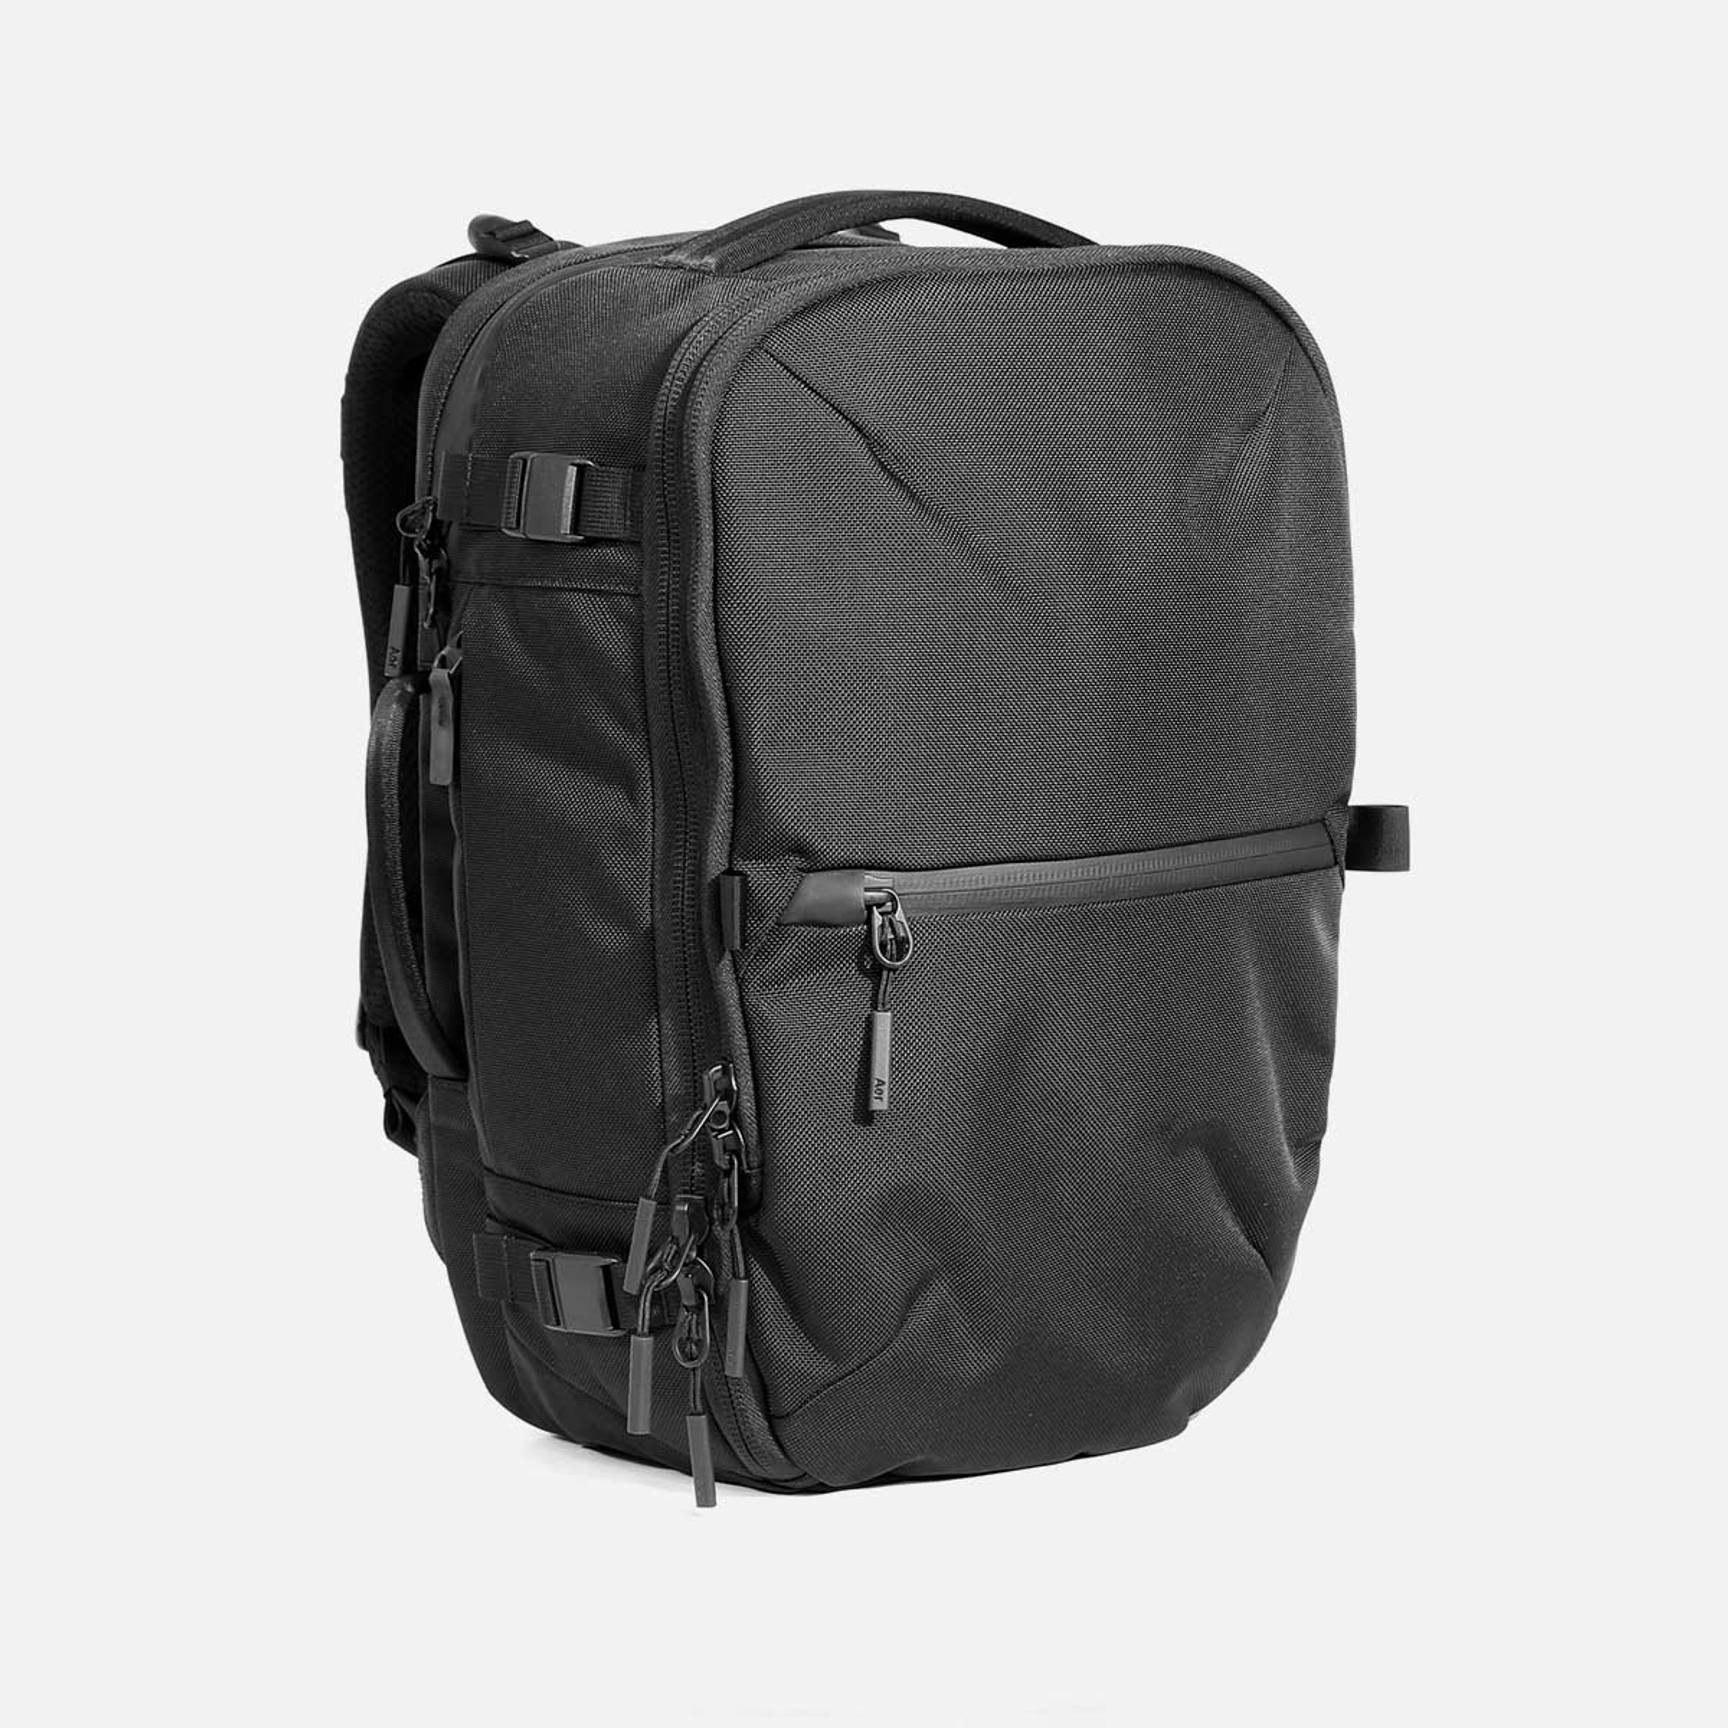 https://cld.accentuate.io/39444979351648/1647455908296/AER21033_travelpack3small_black_34hero.jpg?v=0&options=w_1728